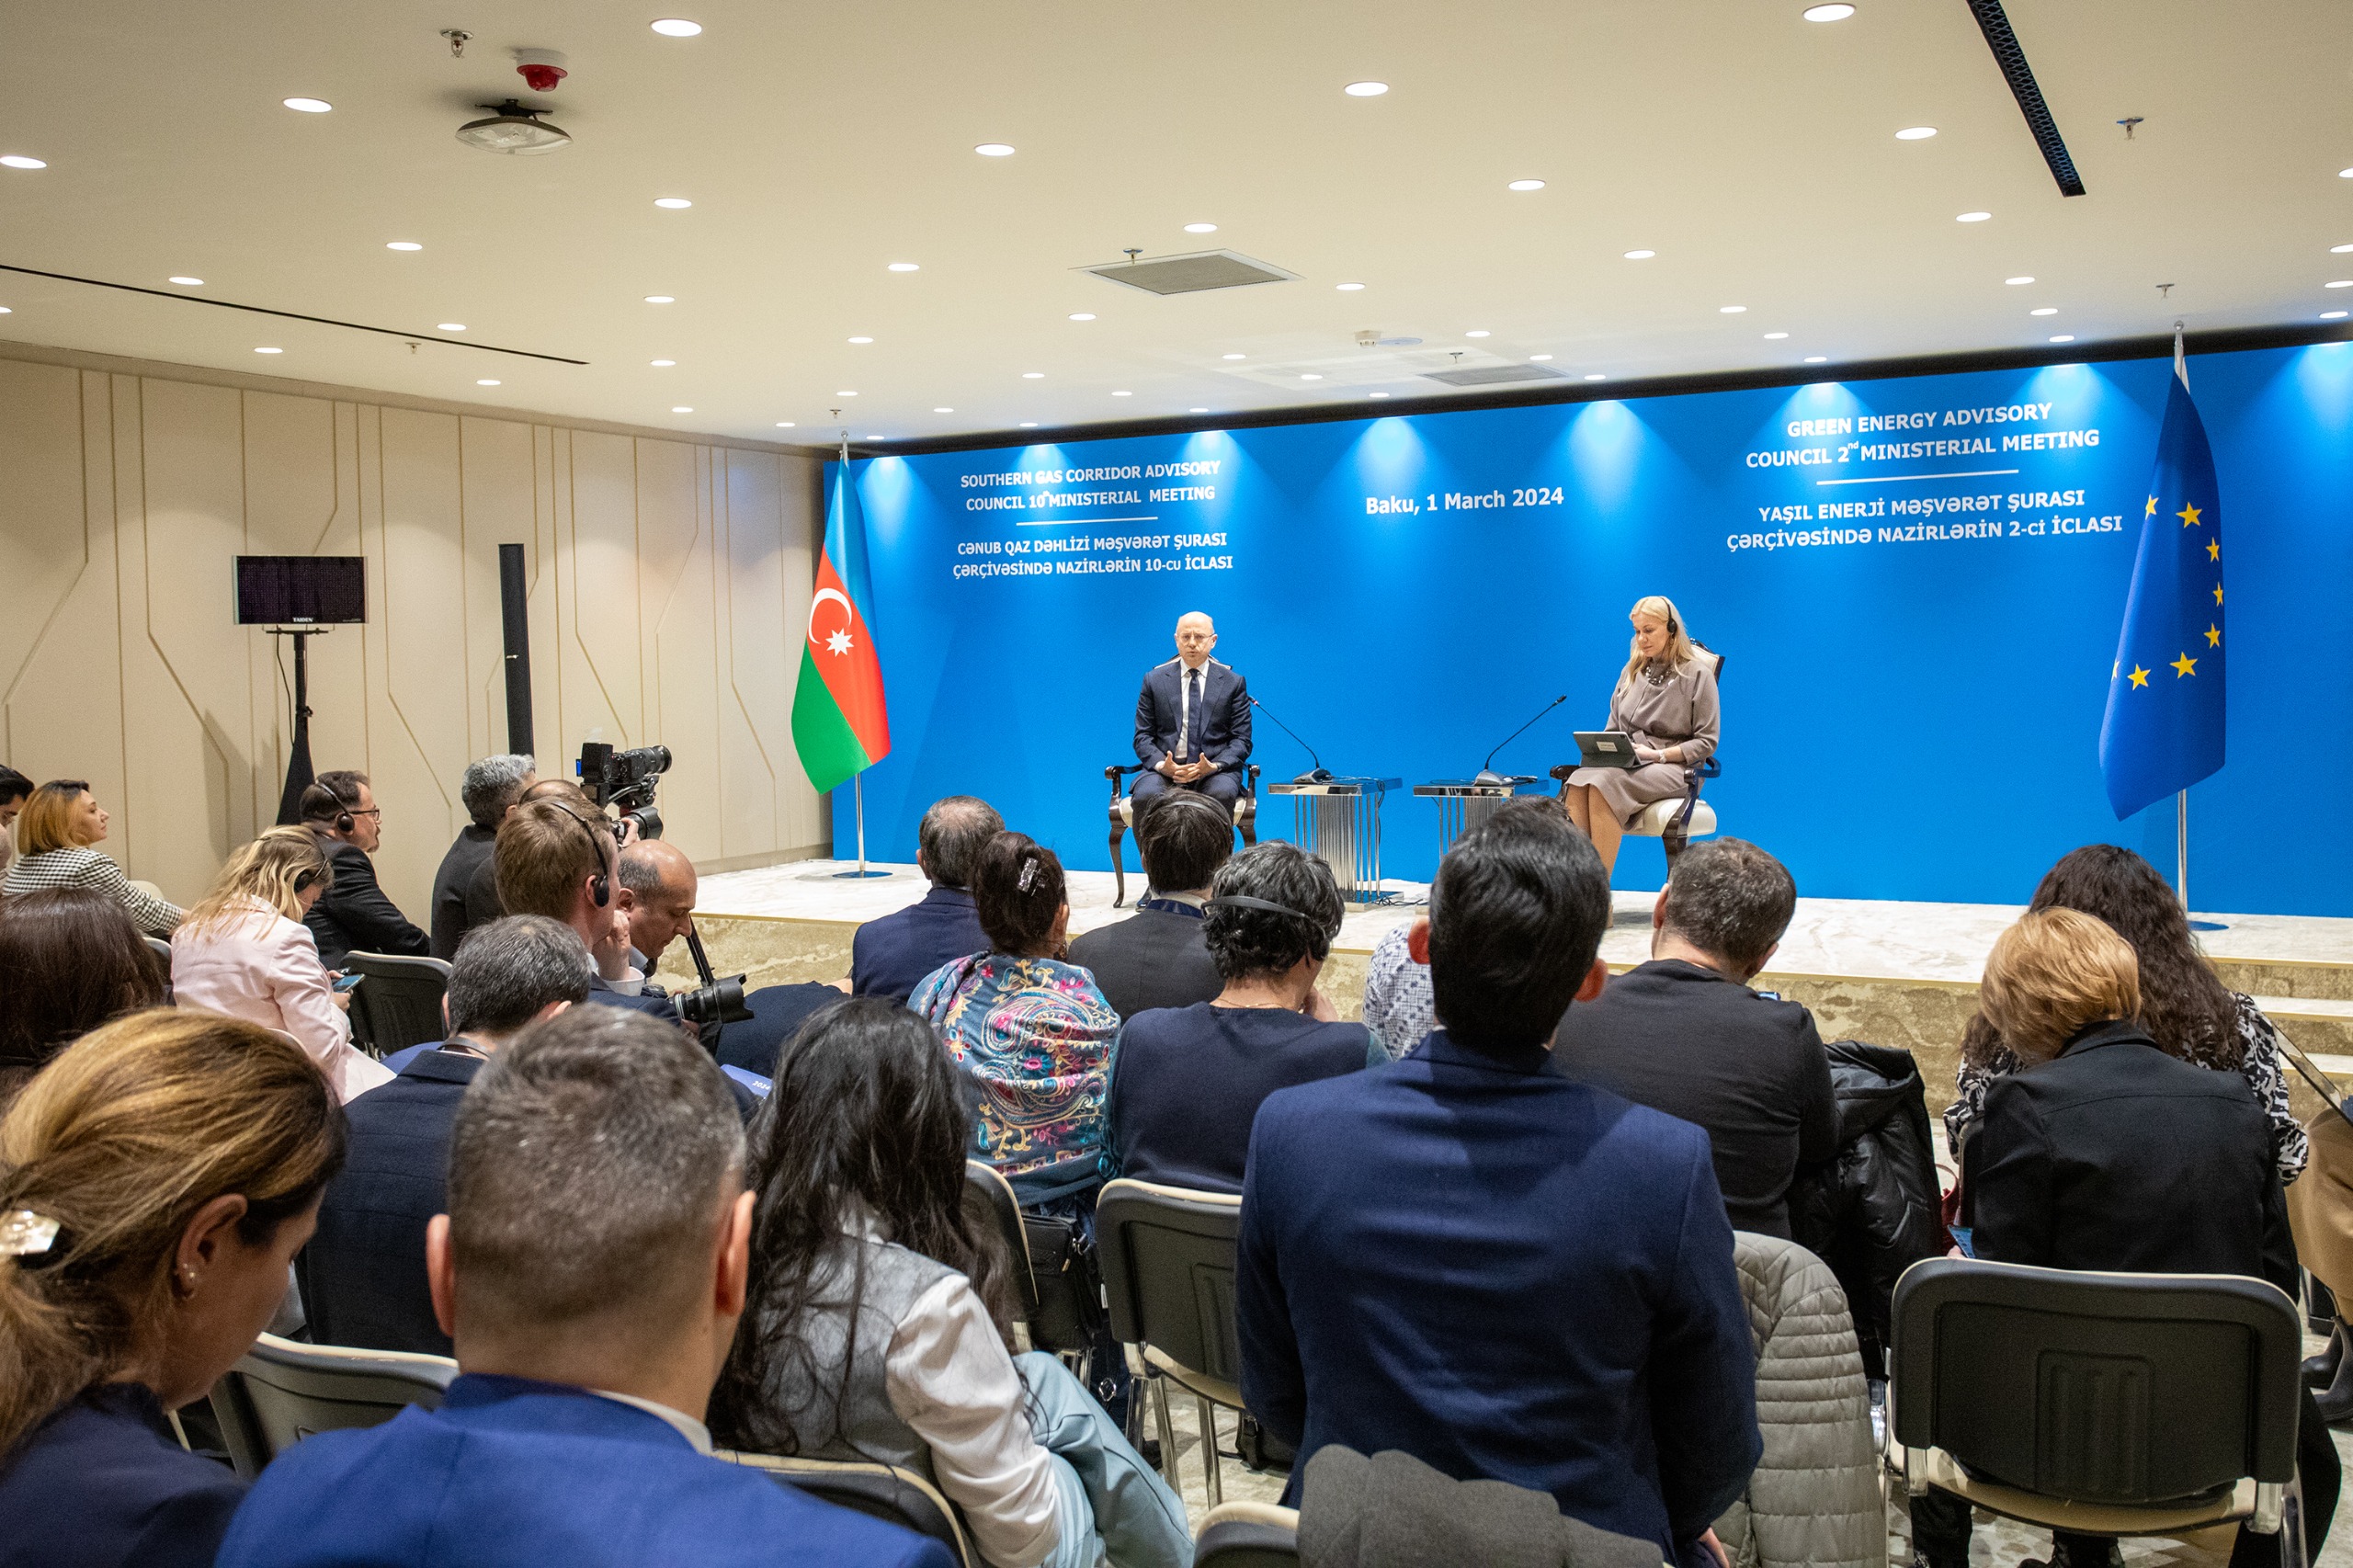 Press statement of Co-Chairs Parviz Shahbazov, minister of Energy of the Republic of Azerbaijan, and Kadri Simson, EU Commissioner for Energy